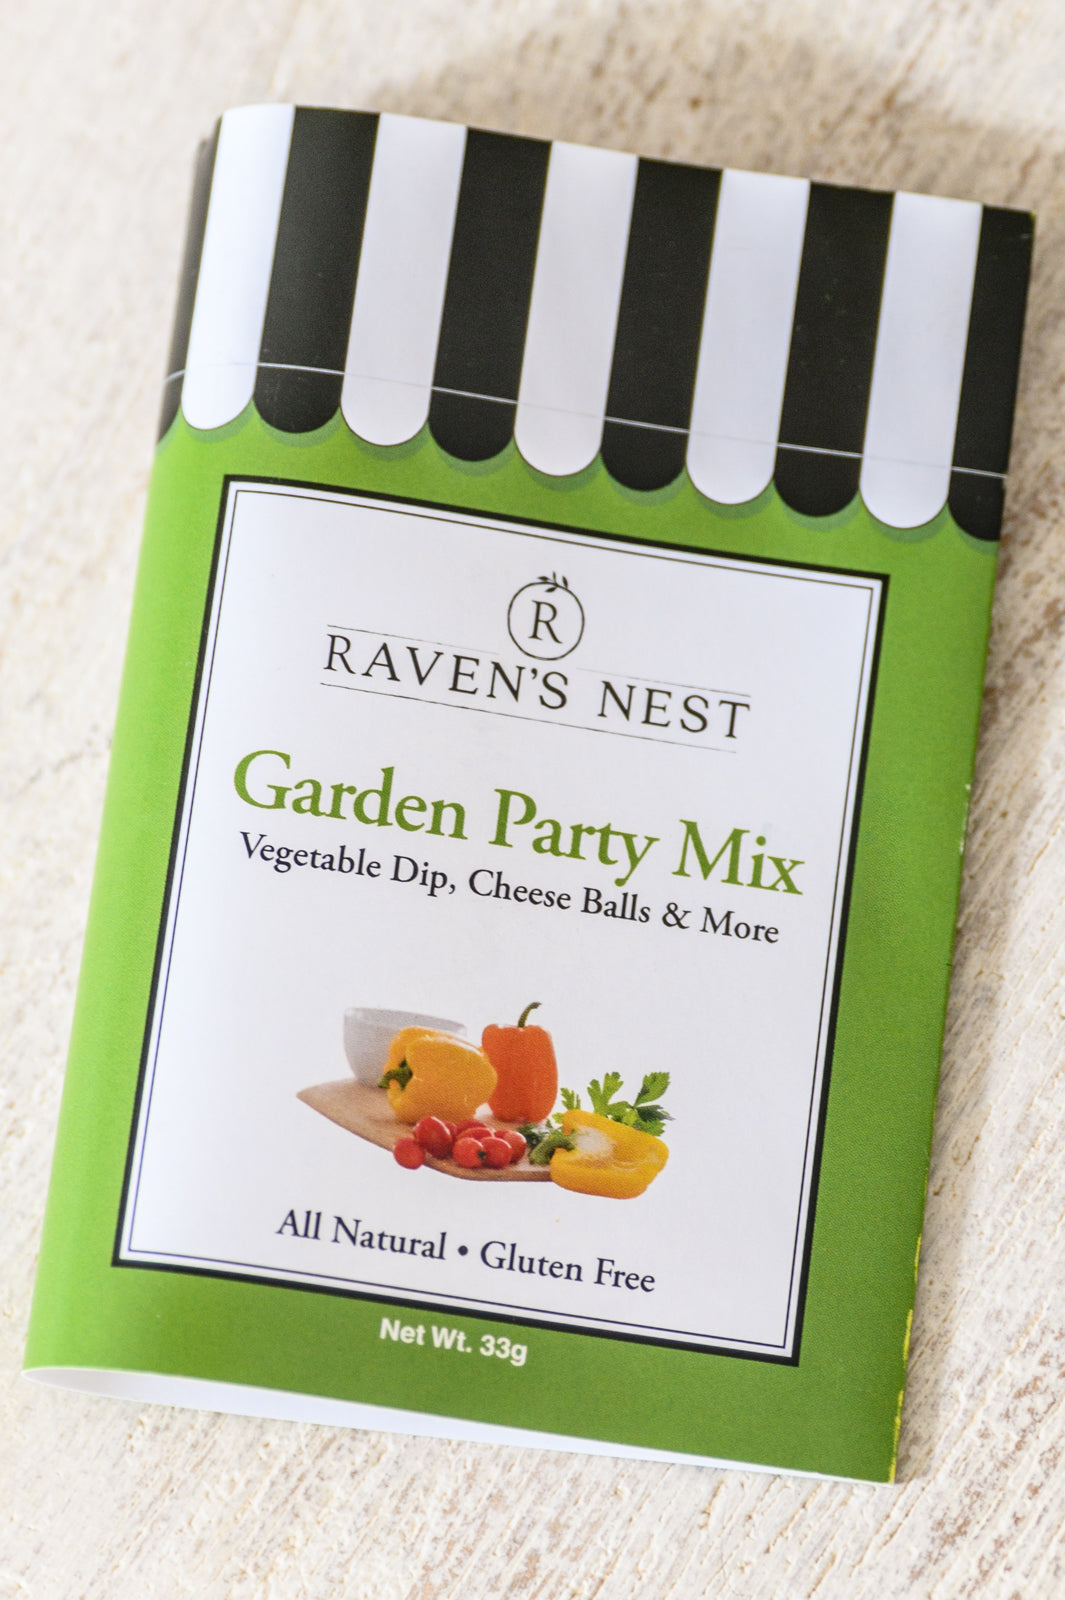 Garden Party Mix & Seasoning By Raven's Nest - final sale